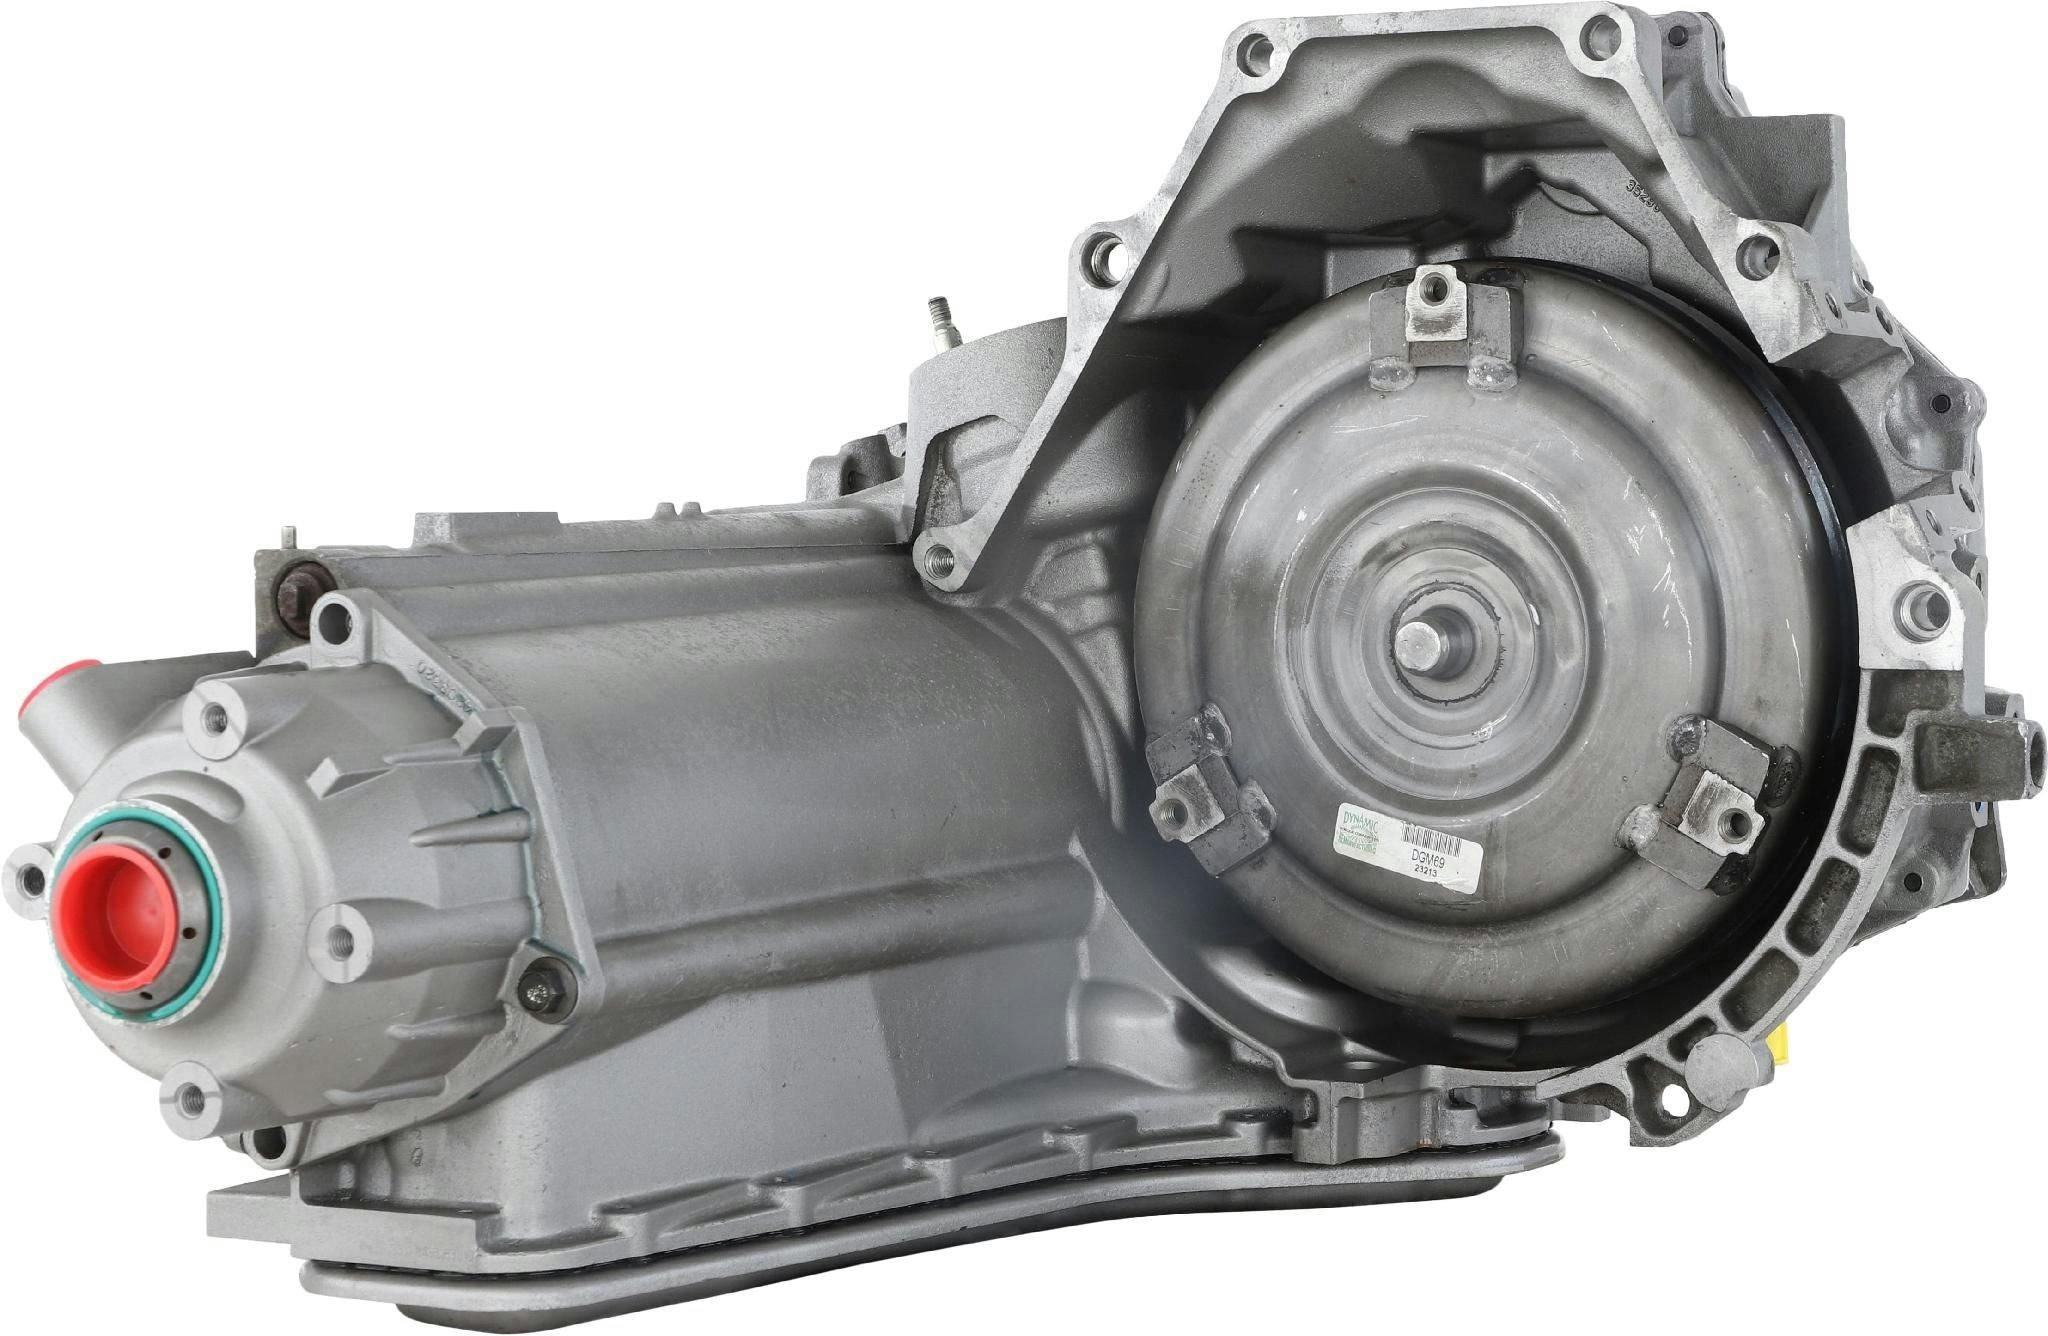 Automatic Transmission for 2006-2009 Buick Allure/LaCrosse and Chevrolet Impala/Monte Carlo FWD with 5.3L V8 Engine